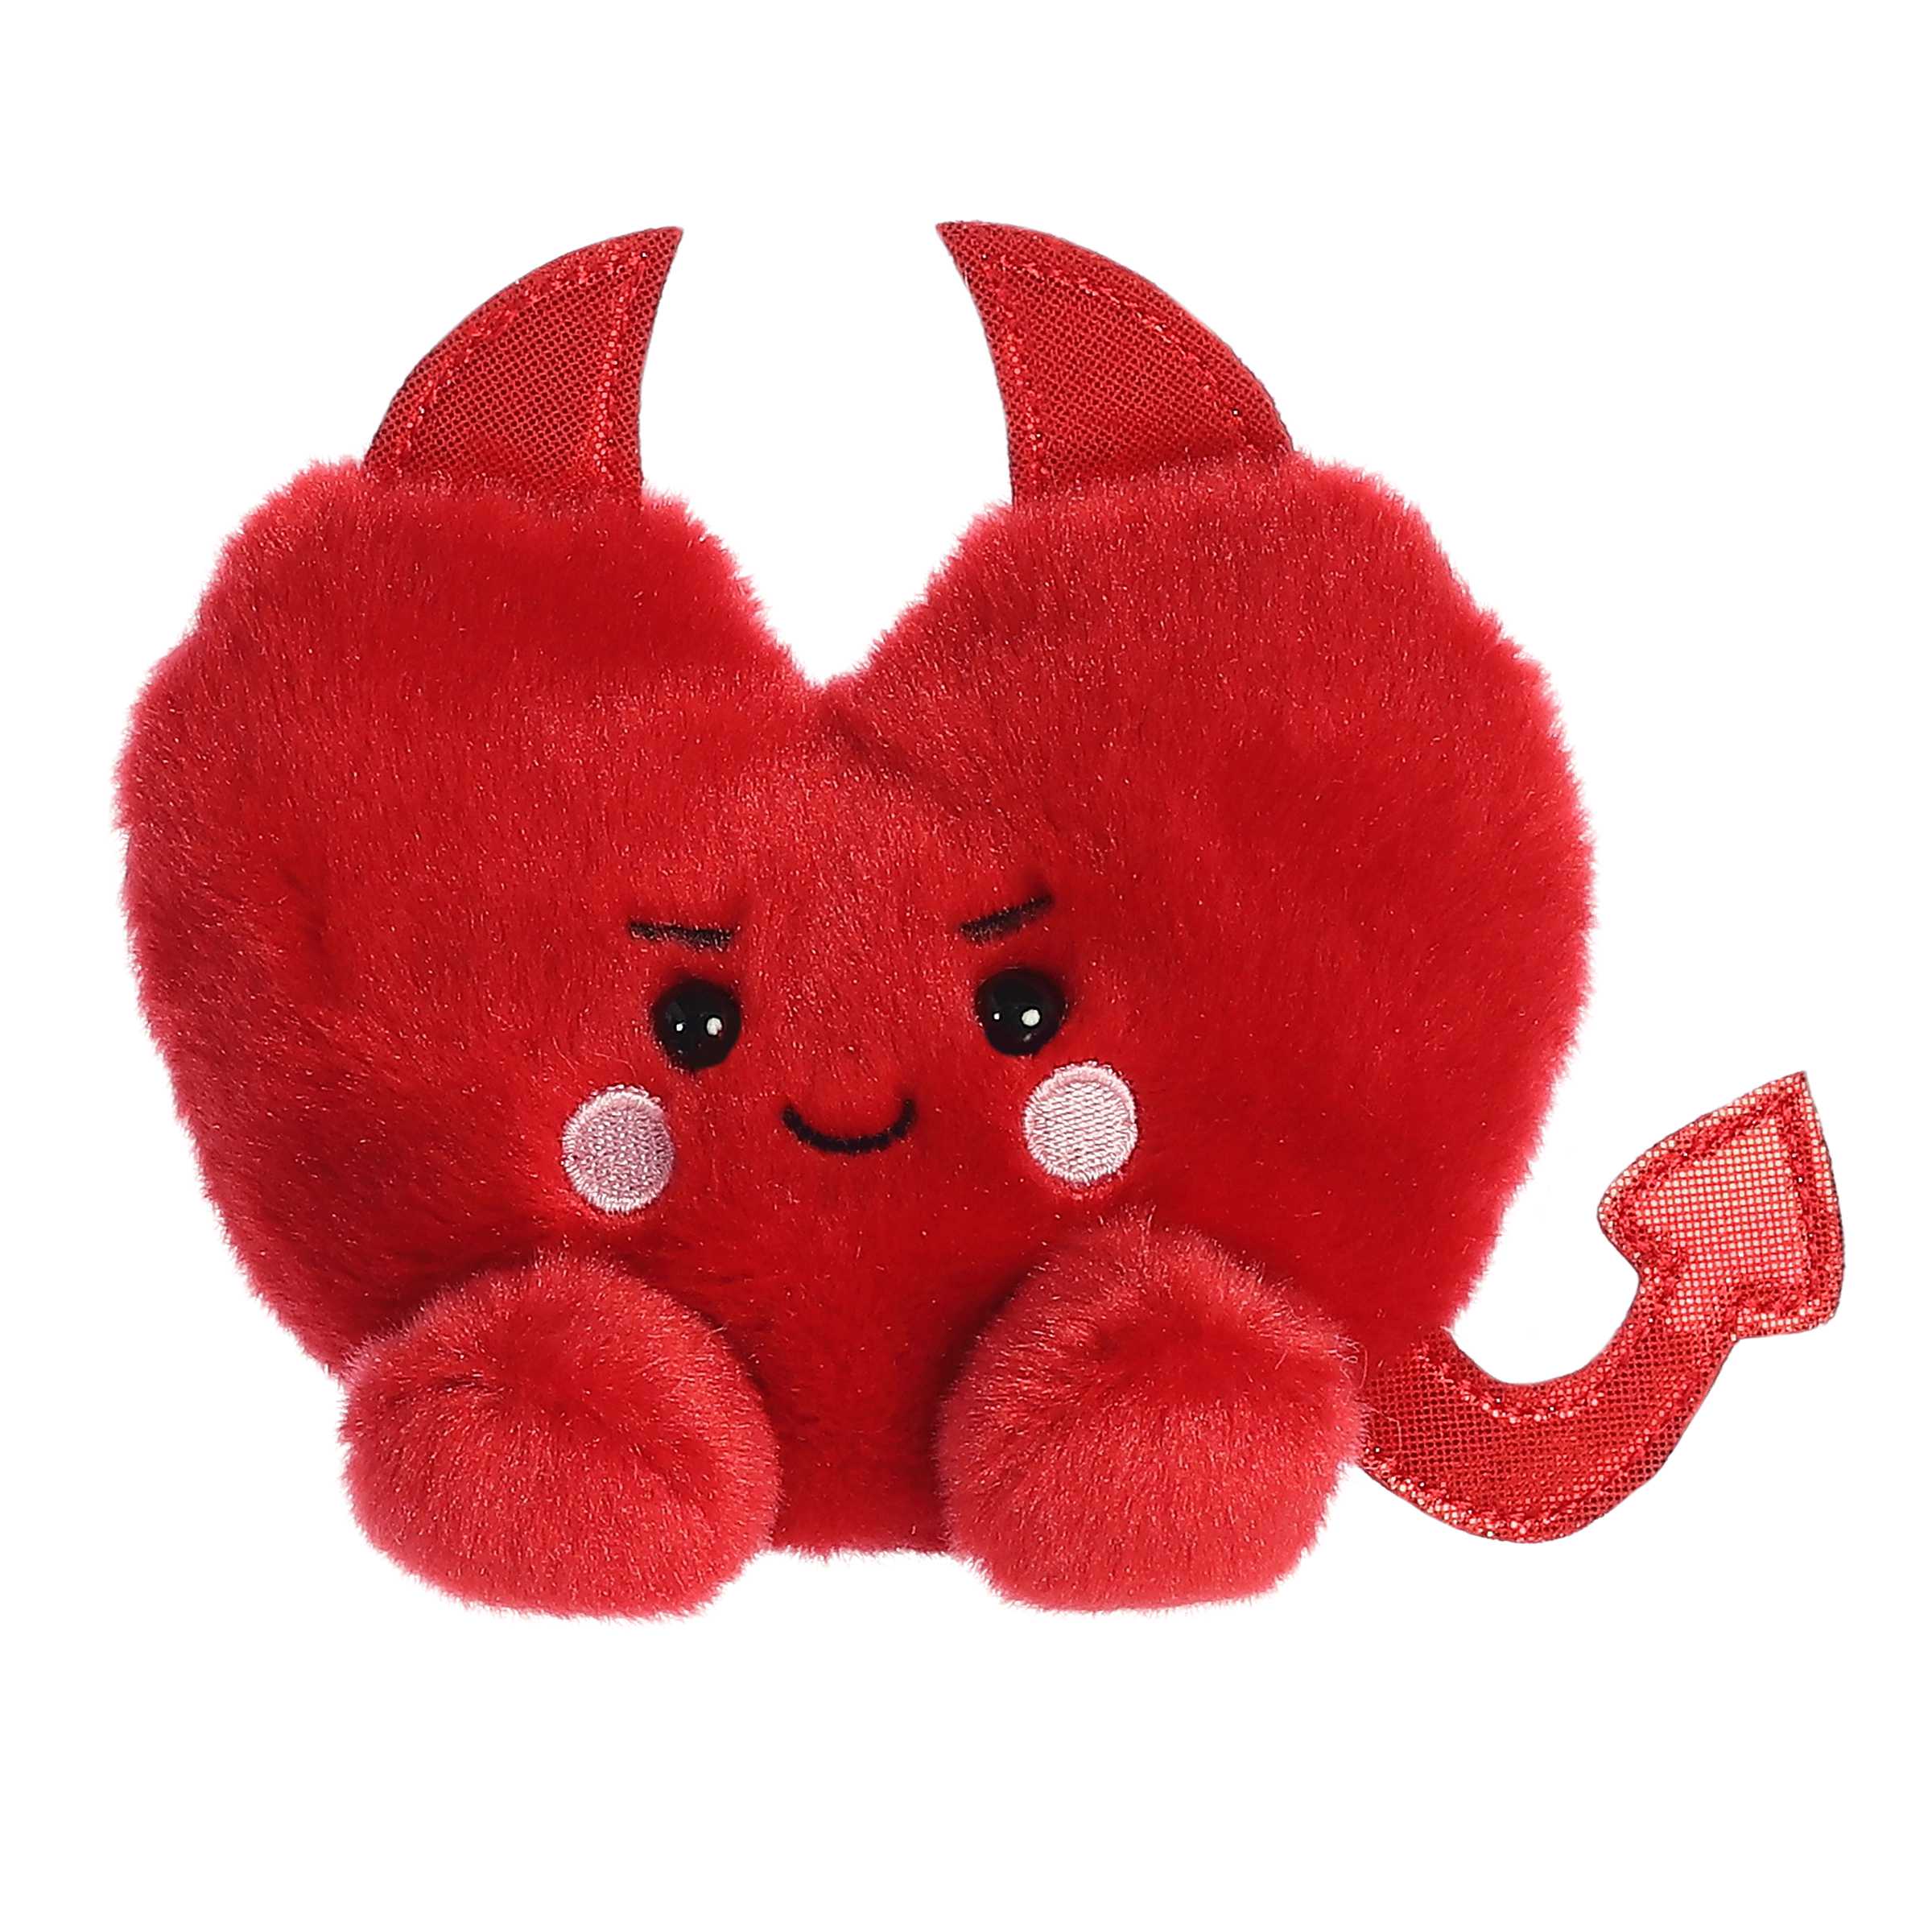 Red devil heart plush heart from Palm Pals with playful horns and tail, embodying mischief and love for Valentine’s Day.